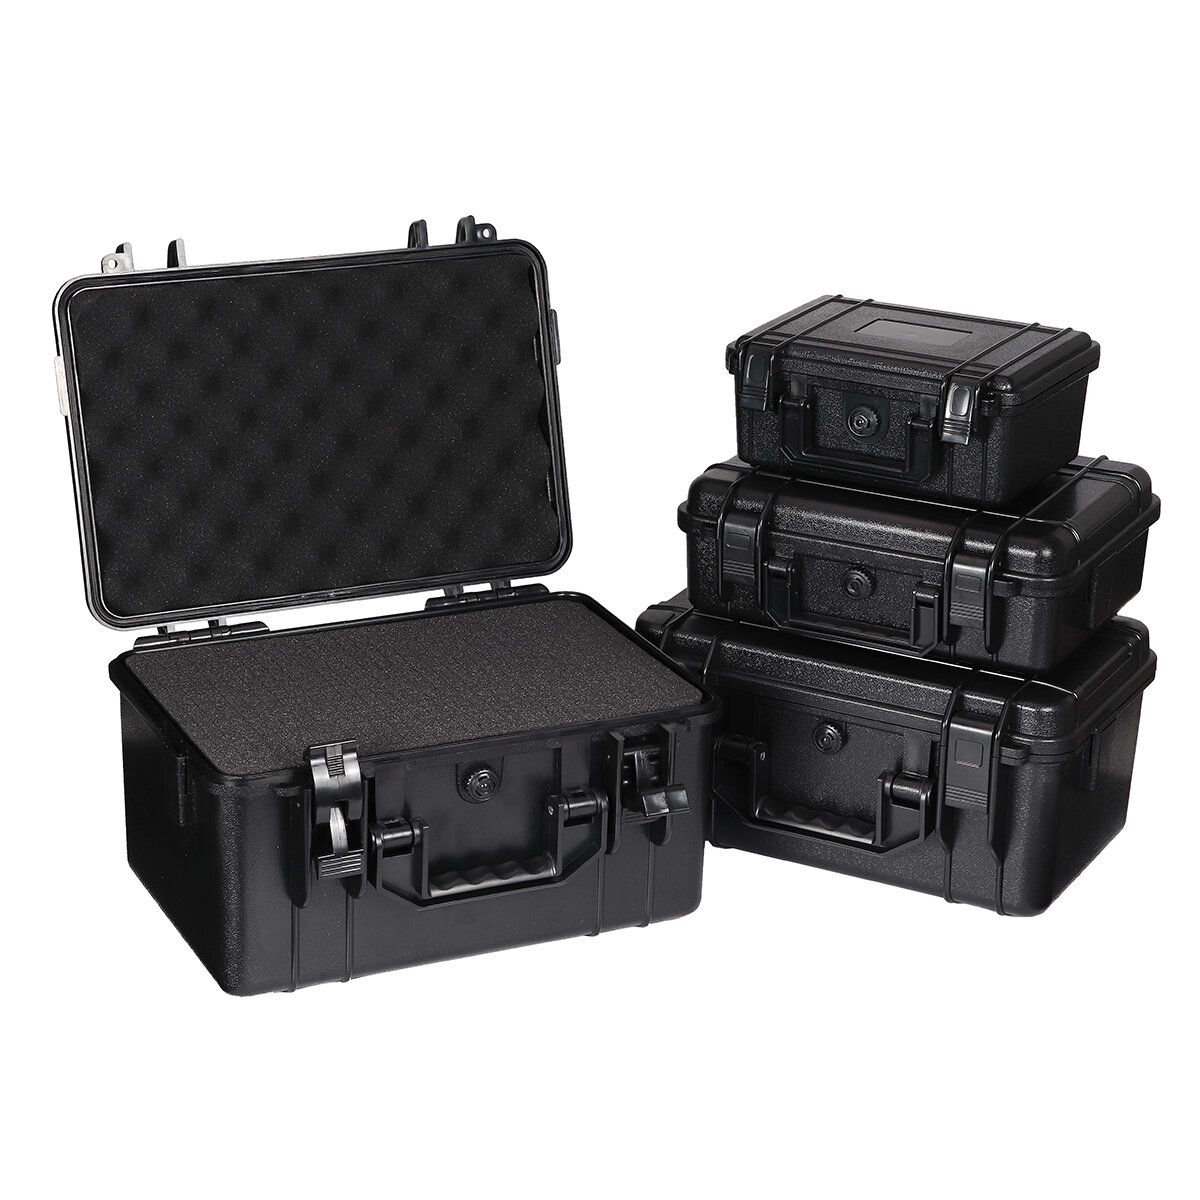 4 Sizes ABS Plastic Sealed Waterproof Storage Case Foam Impact -Resistant Hiking Portable Tool Box D